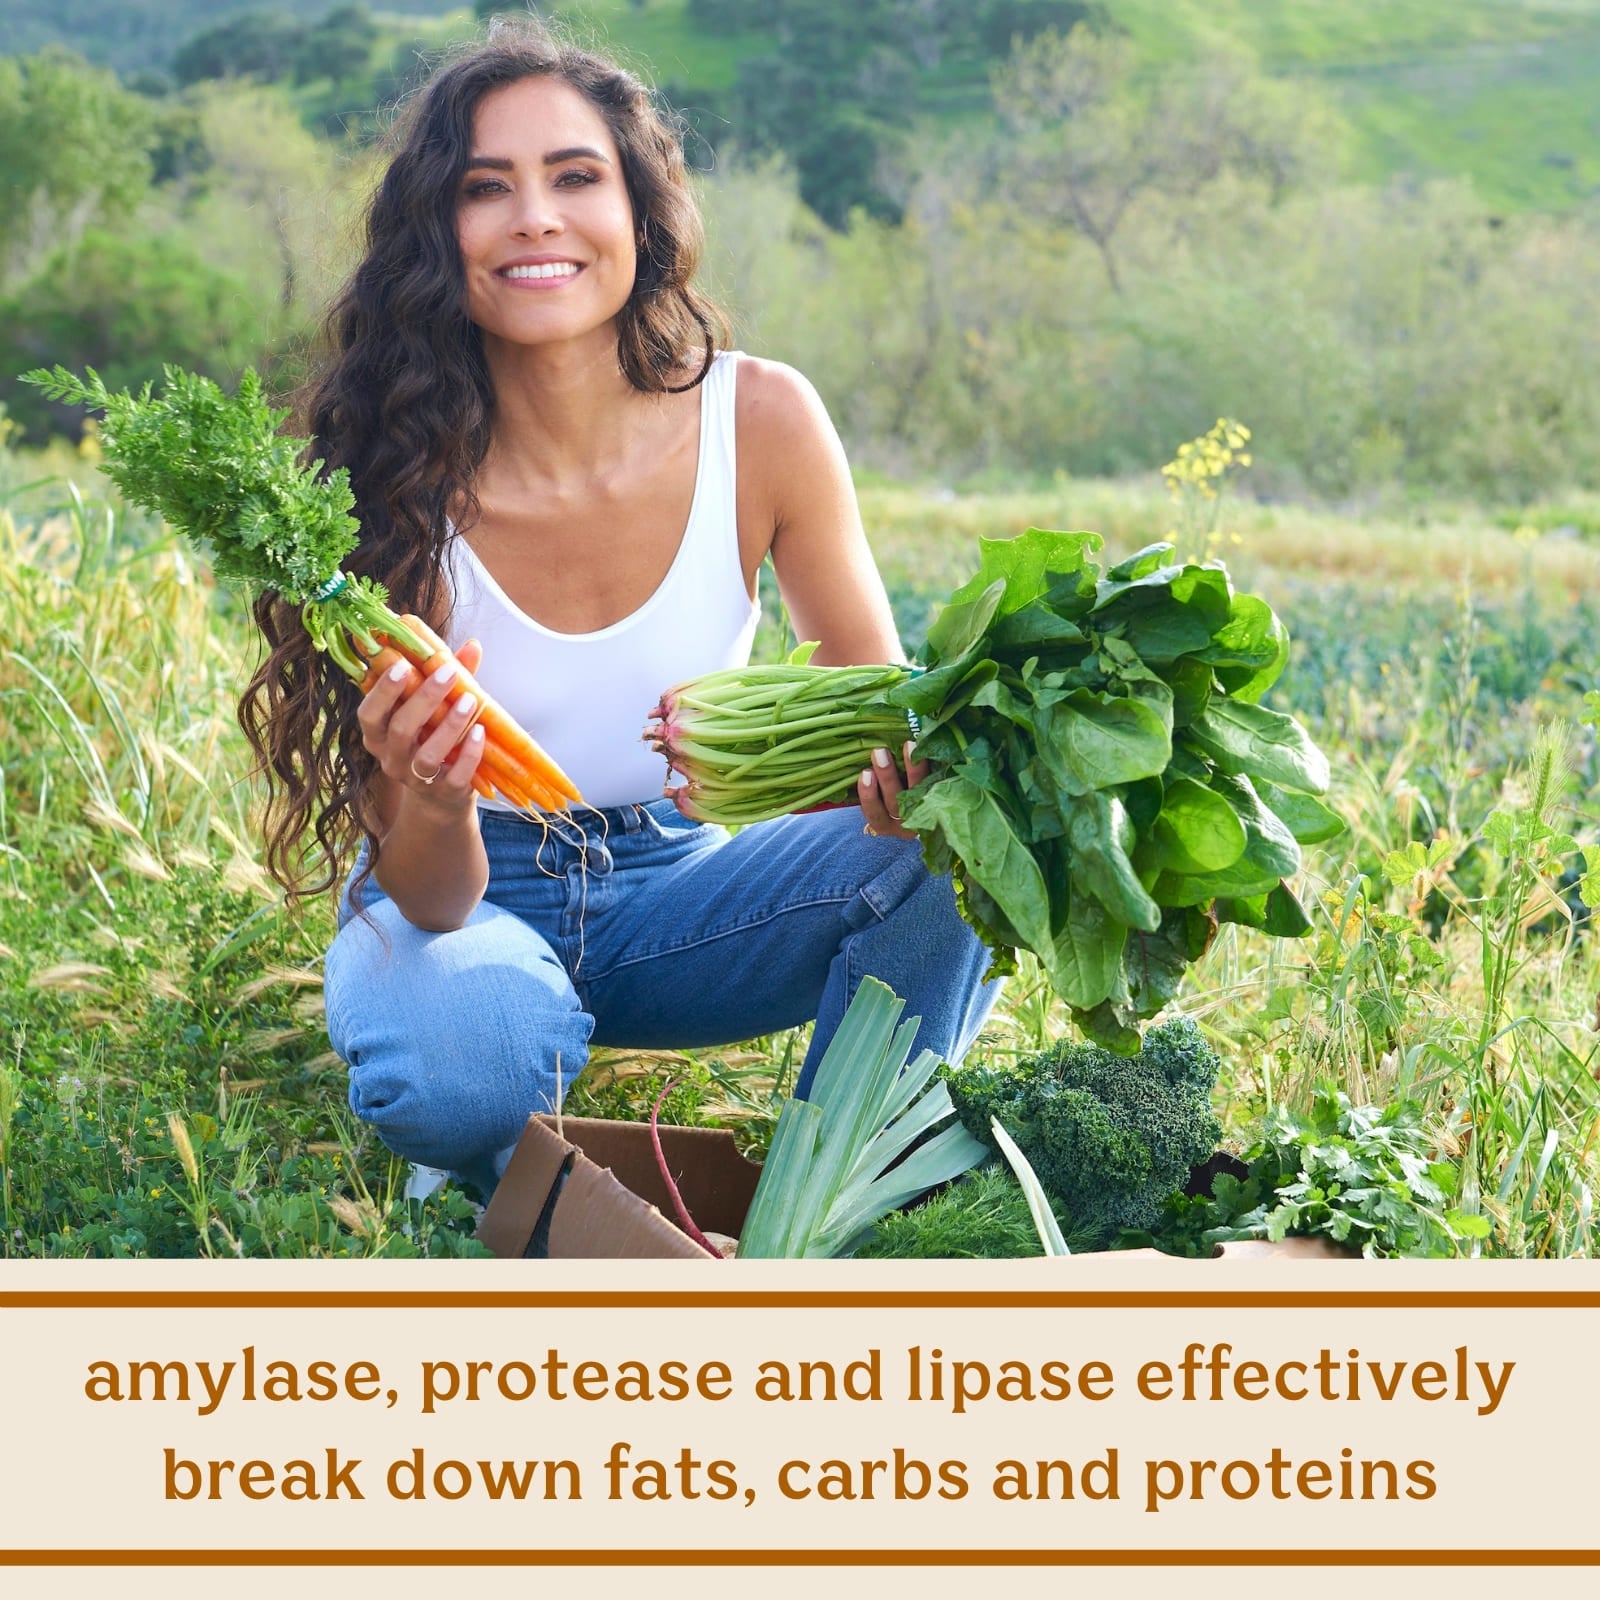 Solluna's Feel Good Digestive Enzymes key ingredient benefit description. Amylase, protease and lipase effectively break down fats, carbs and proteins